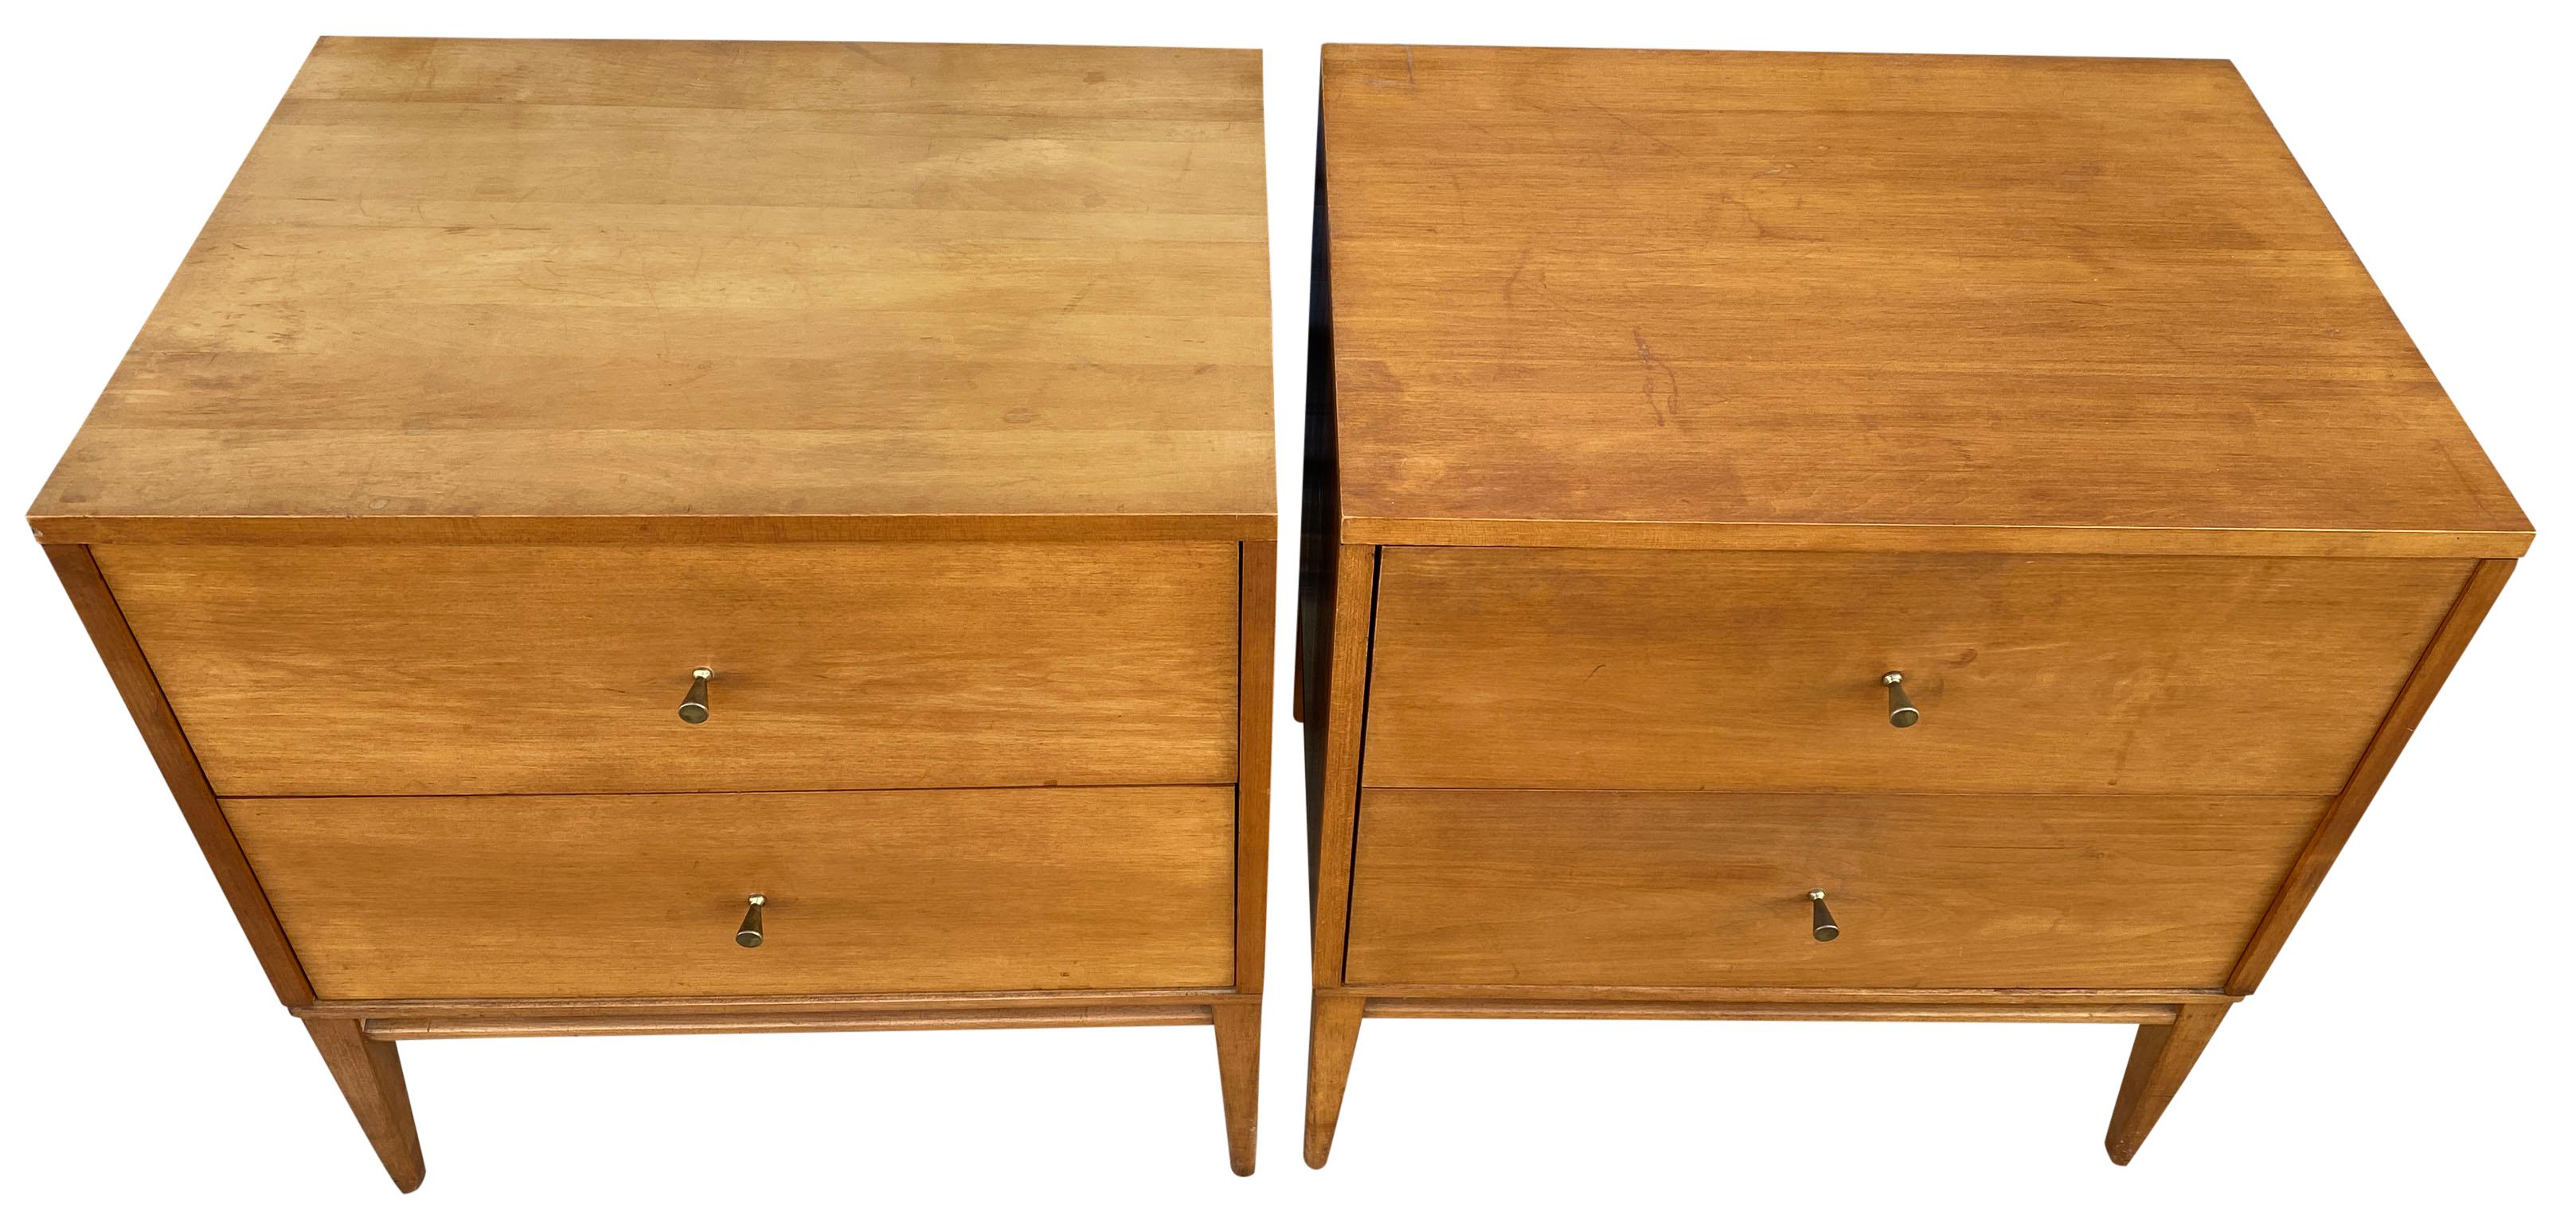 Beautiful pair of Paul McCobb 1950s #1503 blonde solid maple nightstands end tables double-drawer planner Group. Original brass cone pull knobs. Original tobacco blonde finish. Very modern designed pair of nightstands with wood standard base with 4